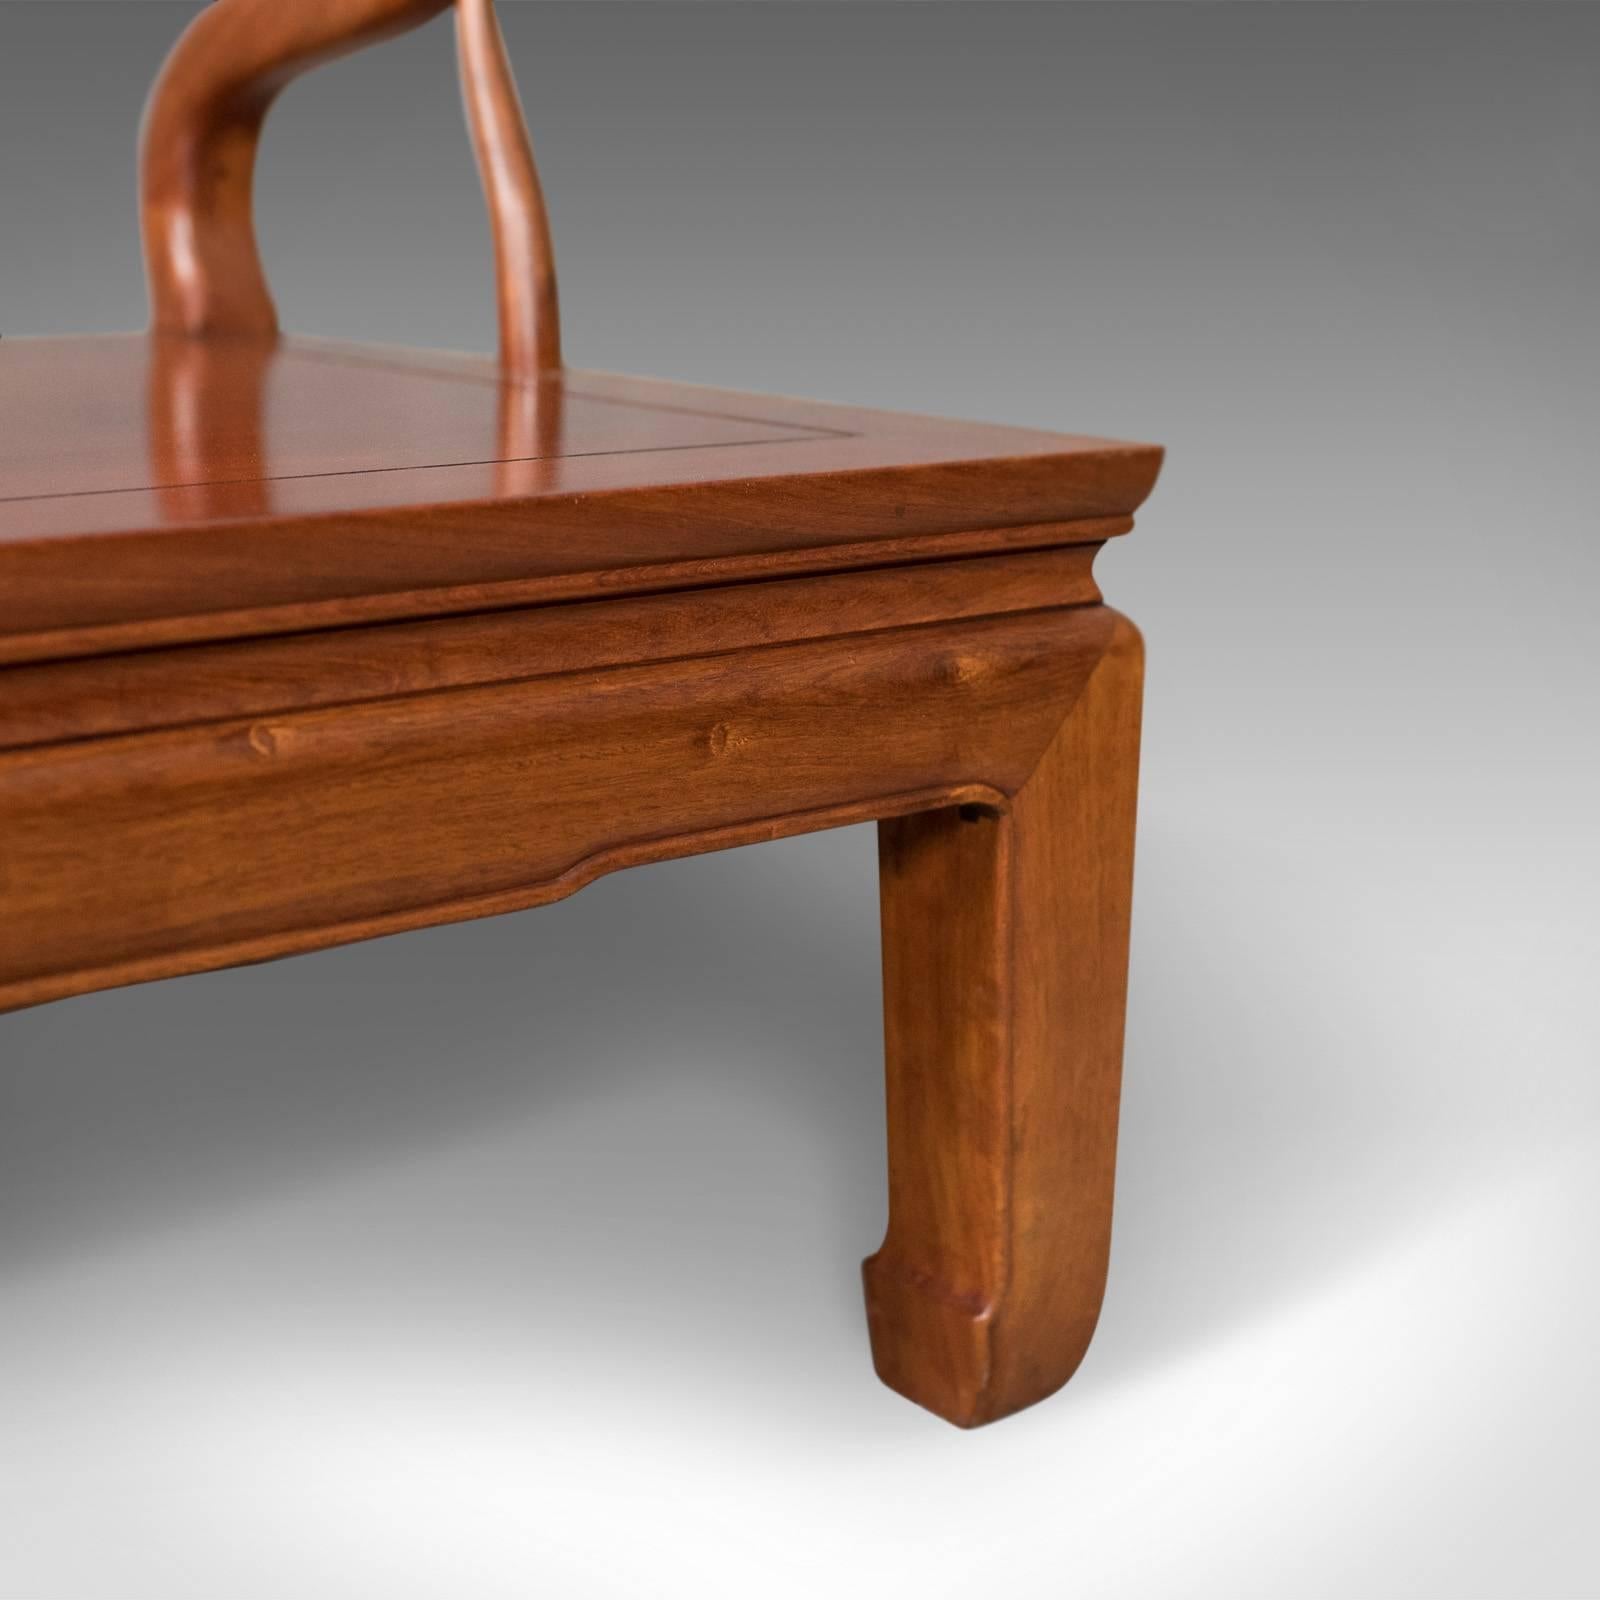 Chinese Rosewood Three-Seat Bench in Traditional Form, Late 20th Century 4